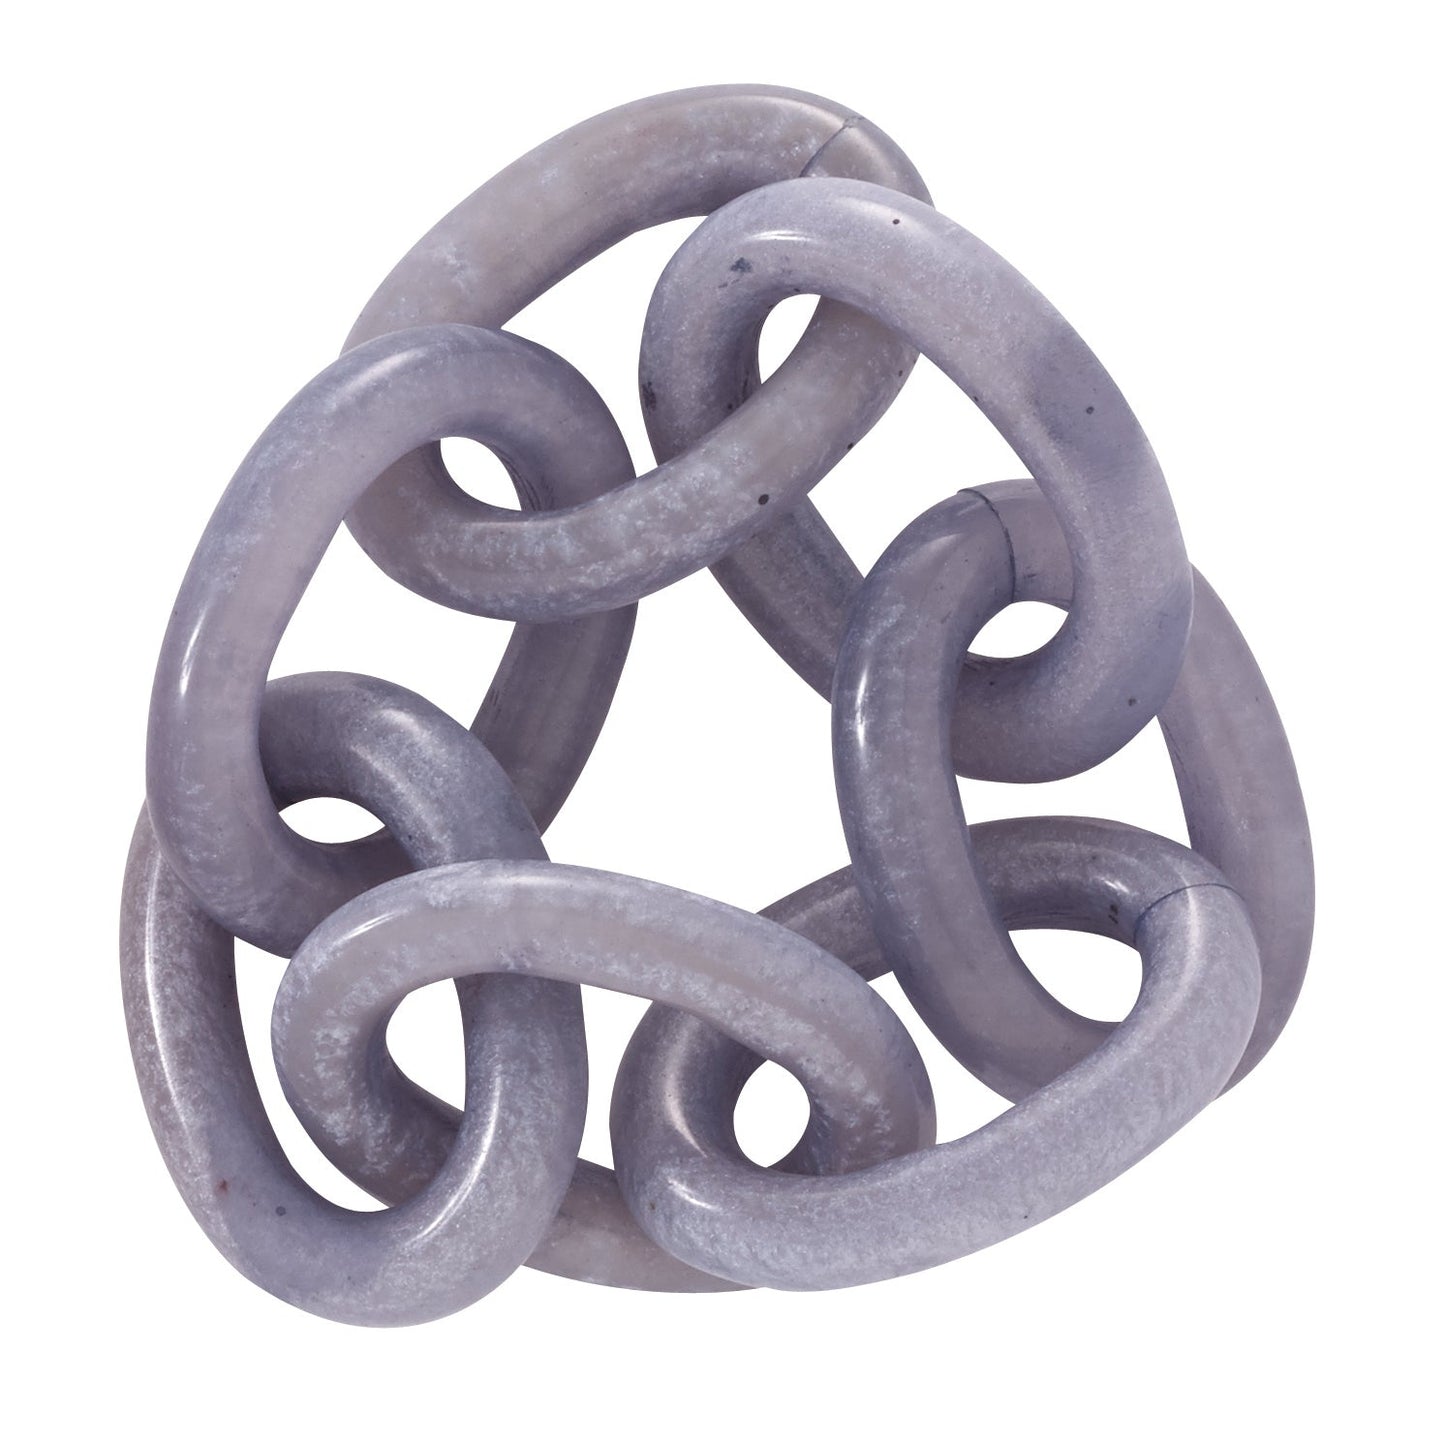 Chain Link Napkin Rings Set of 4